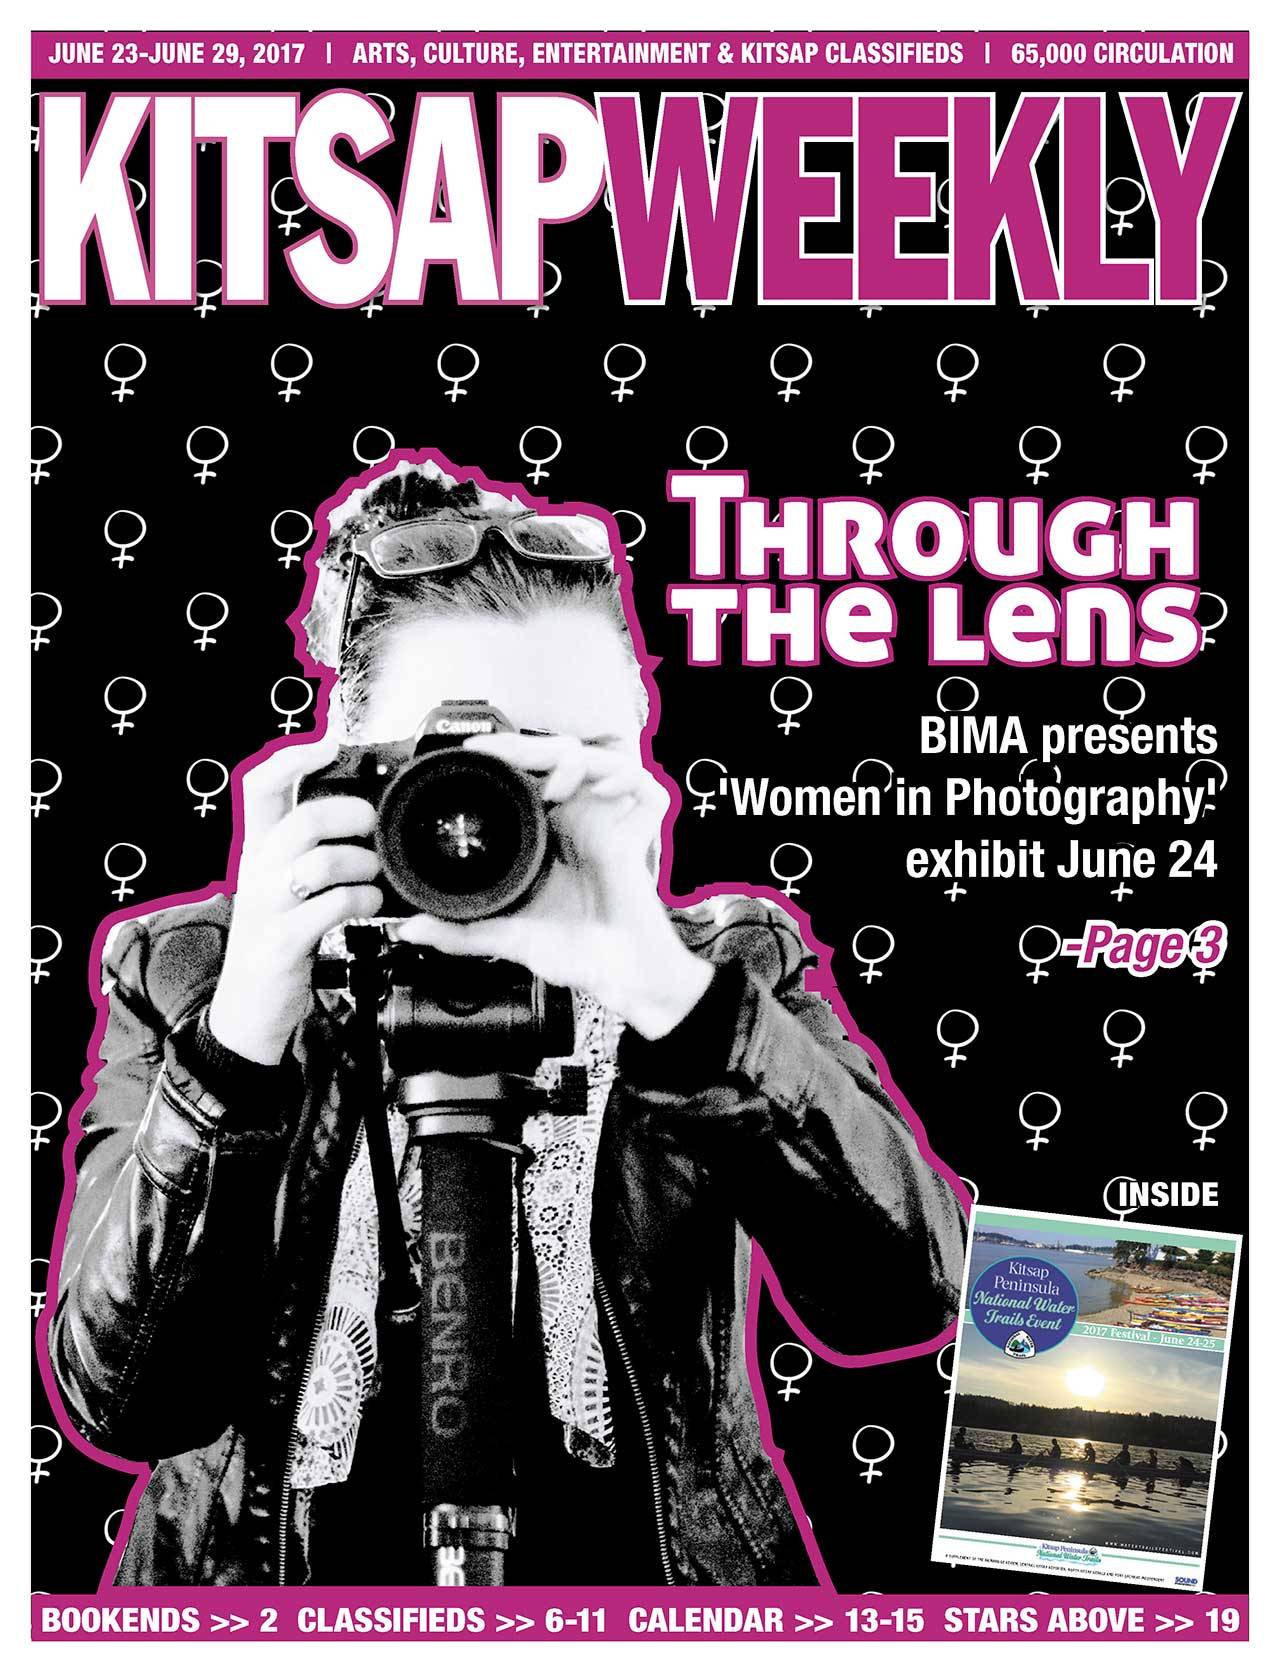 The Bainbridge Island Museum of Art’s ‘Women in Photography’ exhibit will be on display from June 24 to Oct. 1. (Kitsap Weekly cover design by John Rodriguez)